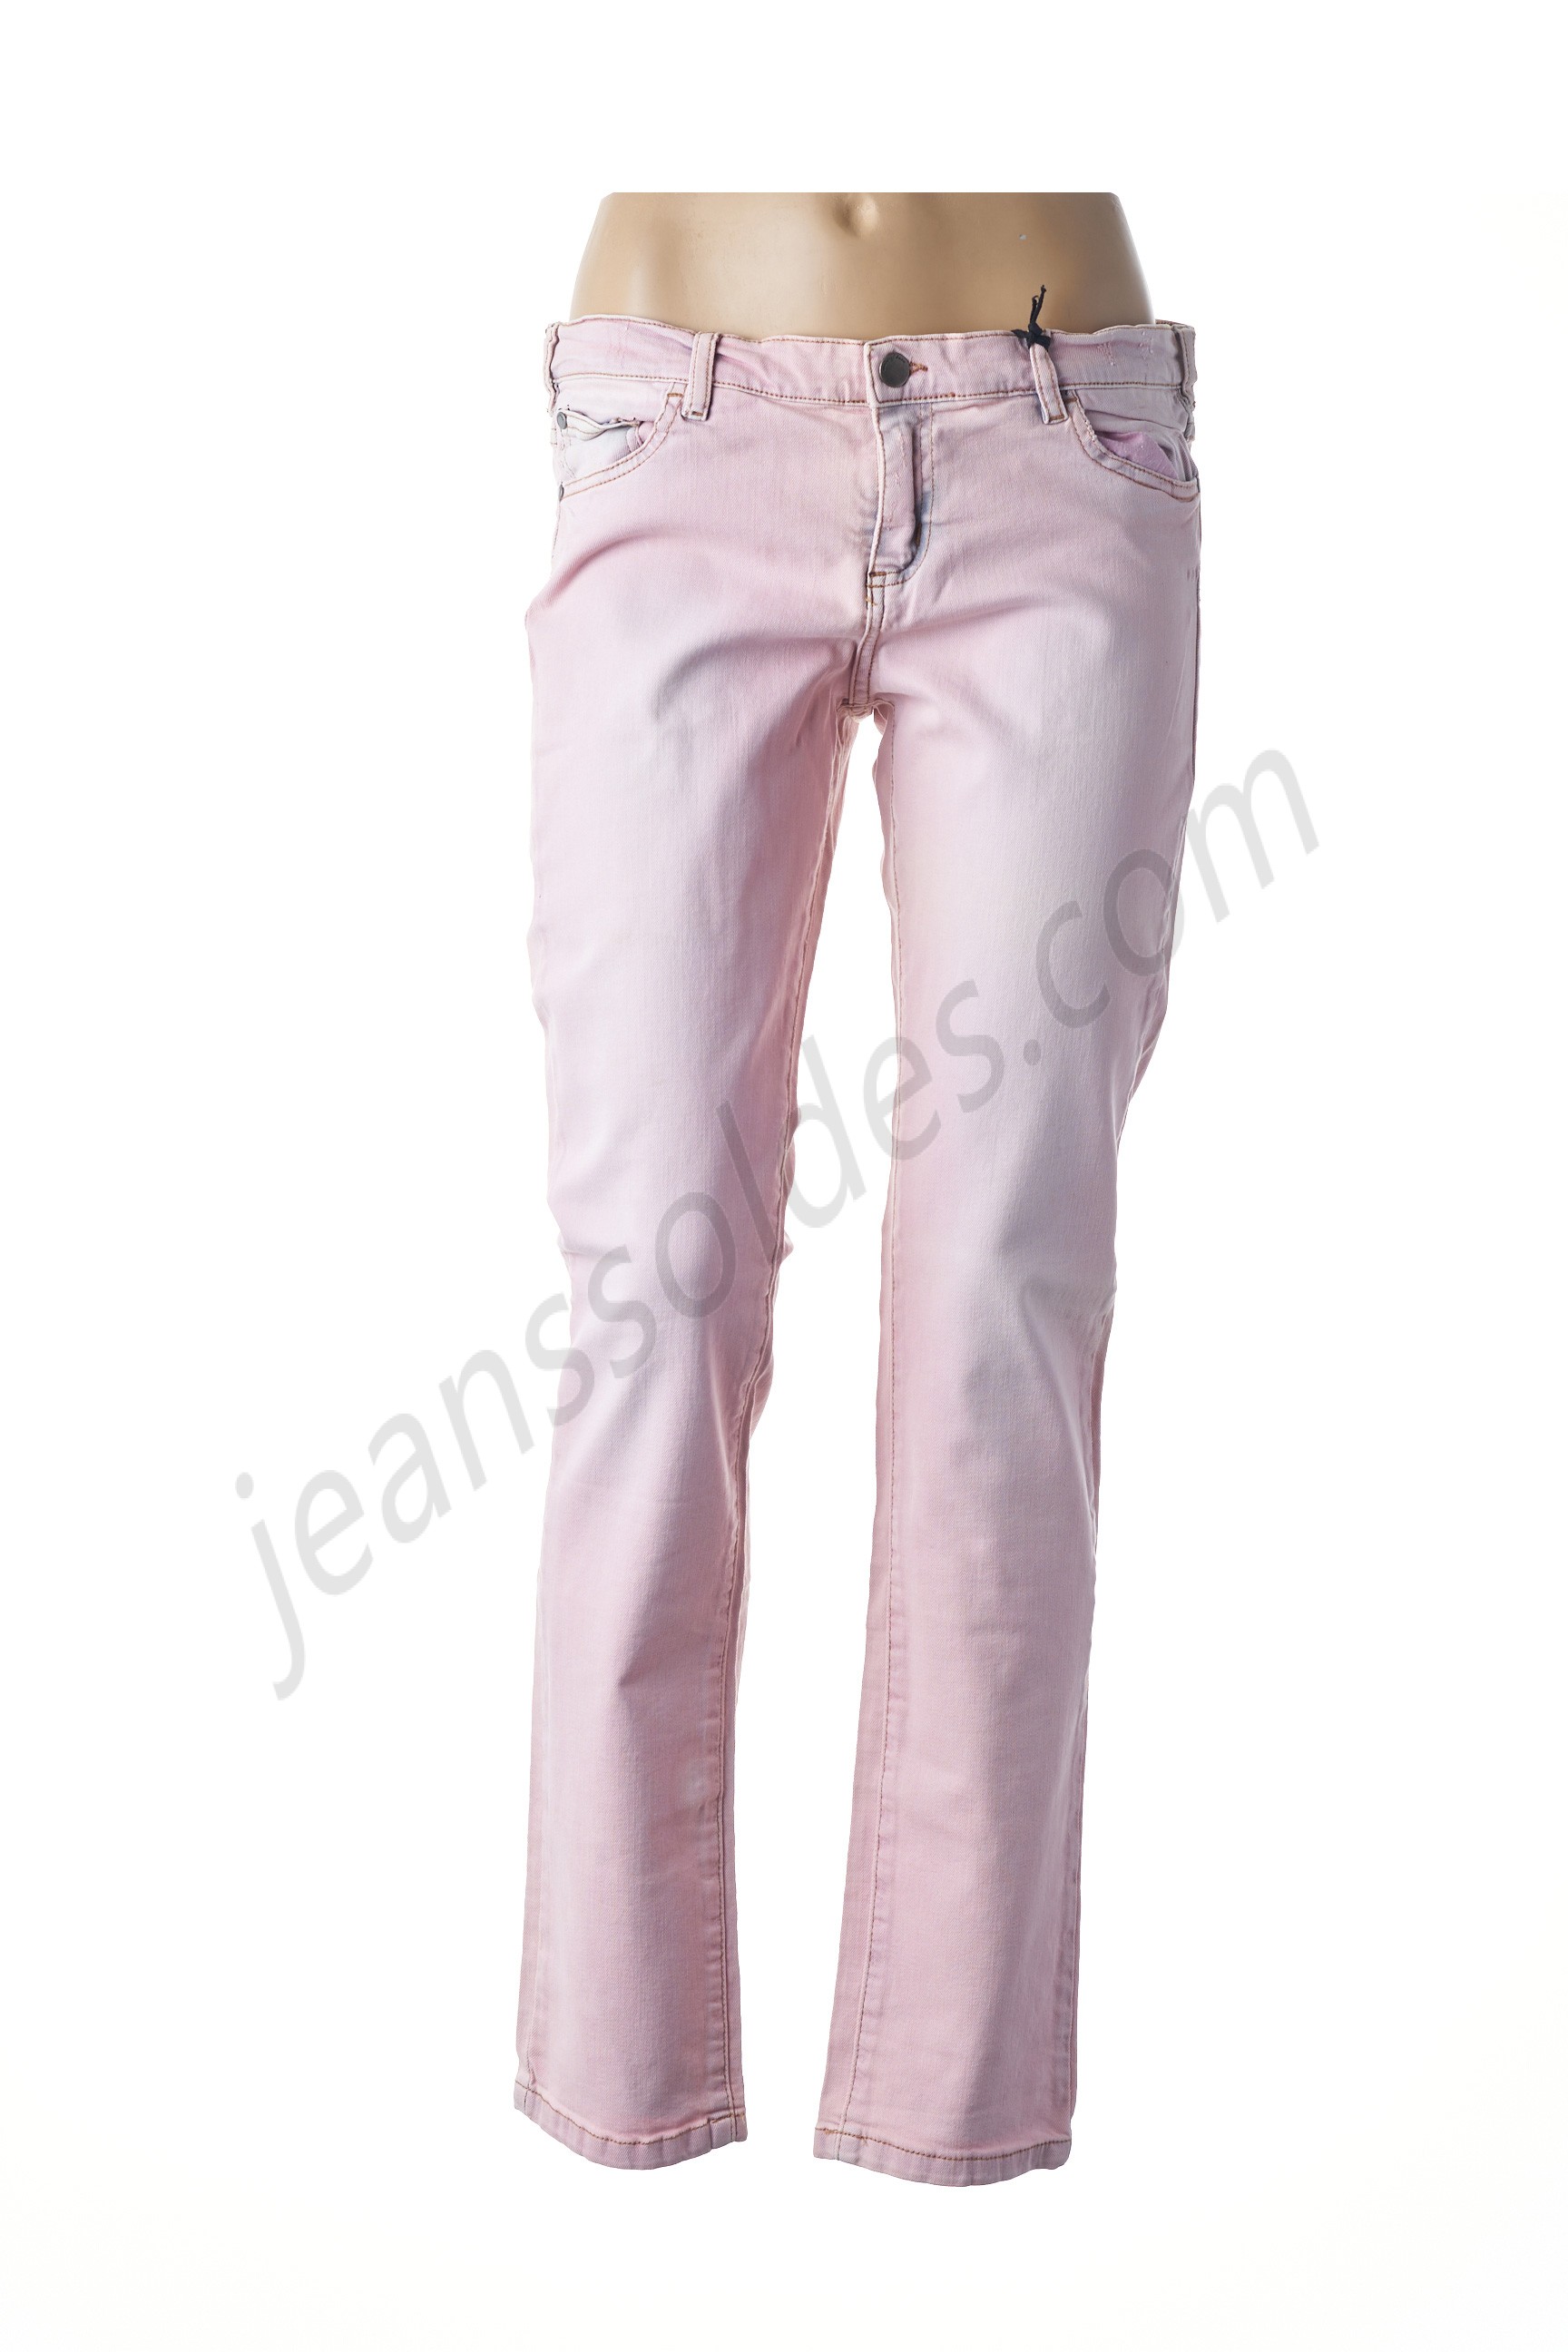 muse of love-Jeans coupe slim prix d’amis - muse of love-Jeans coupe slim prix d’amis